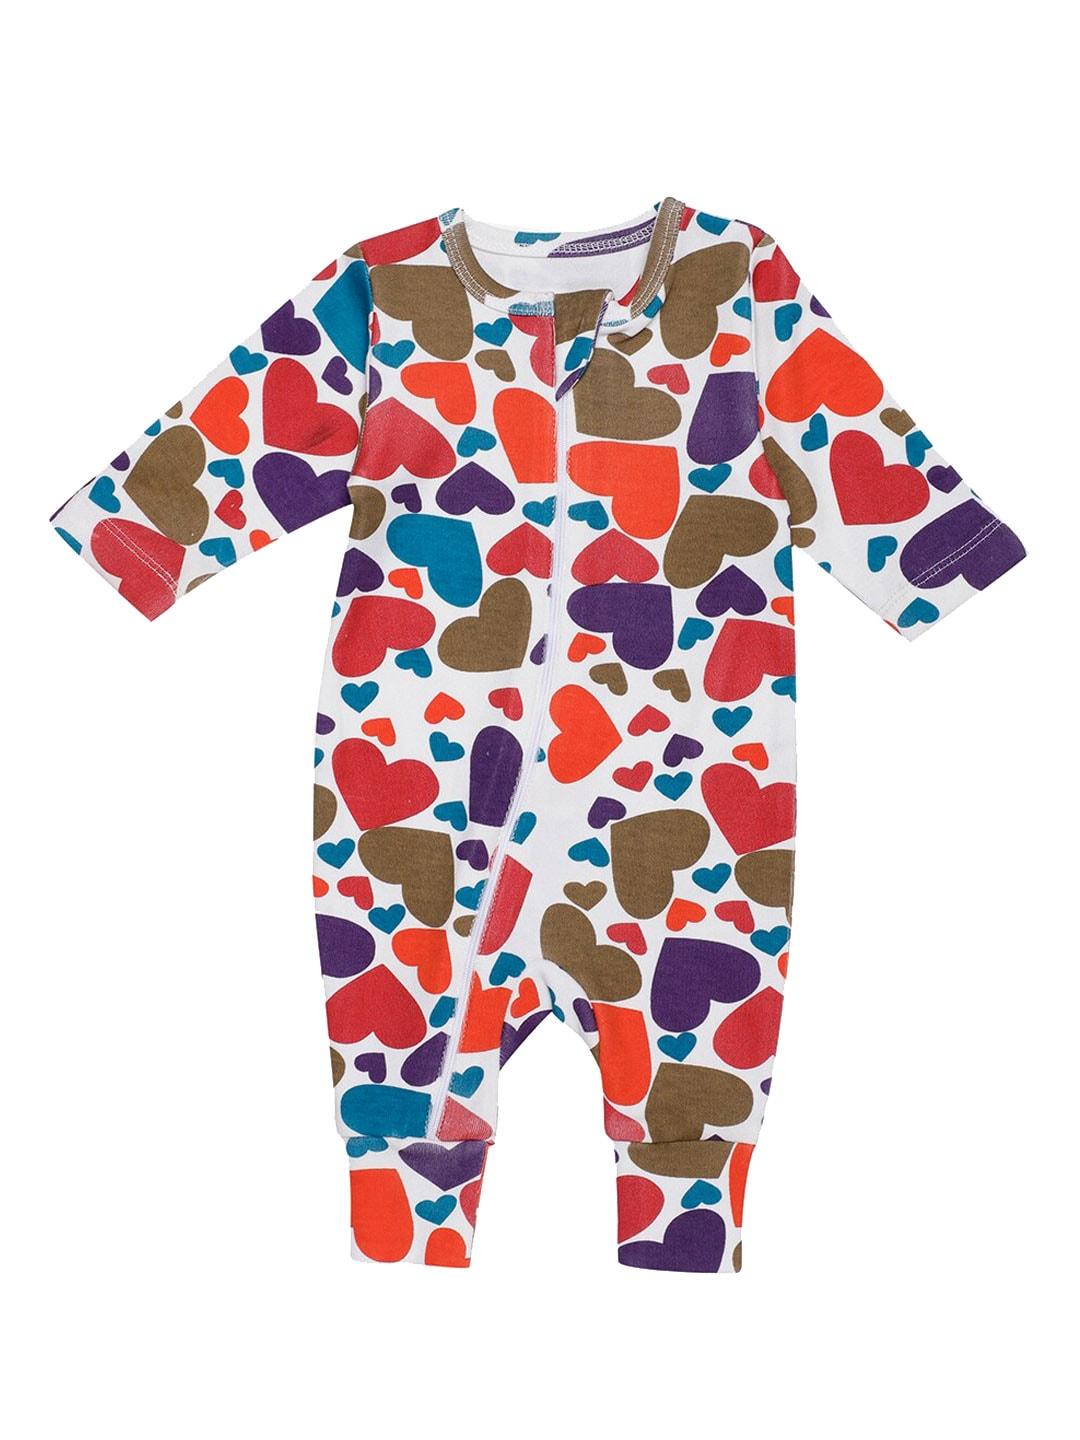 nino-bambino-infant-white-&-red-printed-organic-cotton-sustainable-rompers